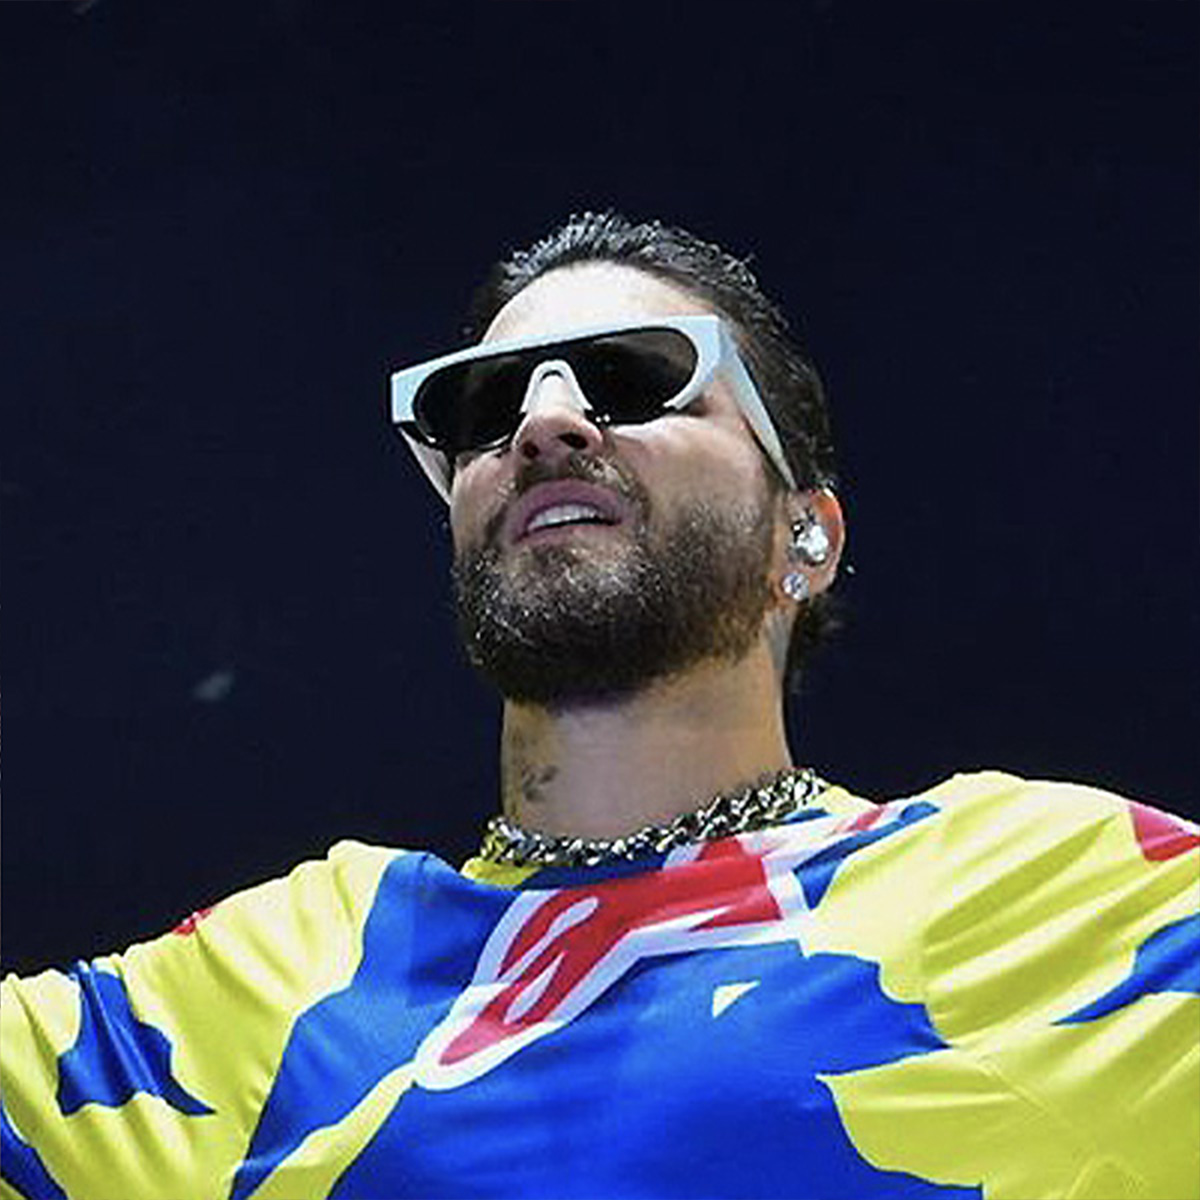 MALUMA wearing the THIERRY LASRY sunglasses "KANIBALY" at his concert in Argentina